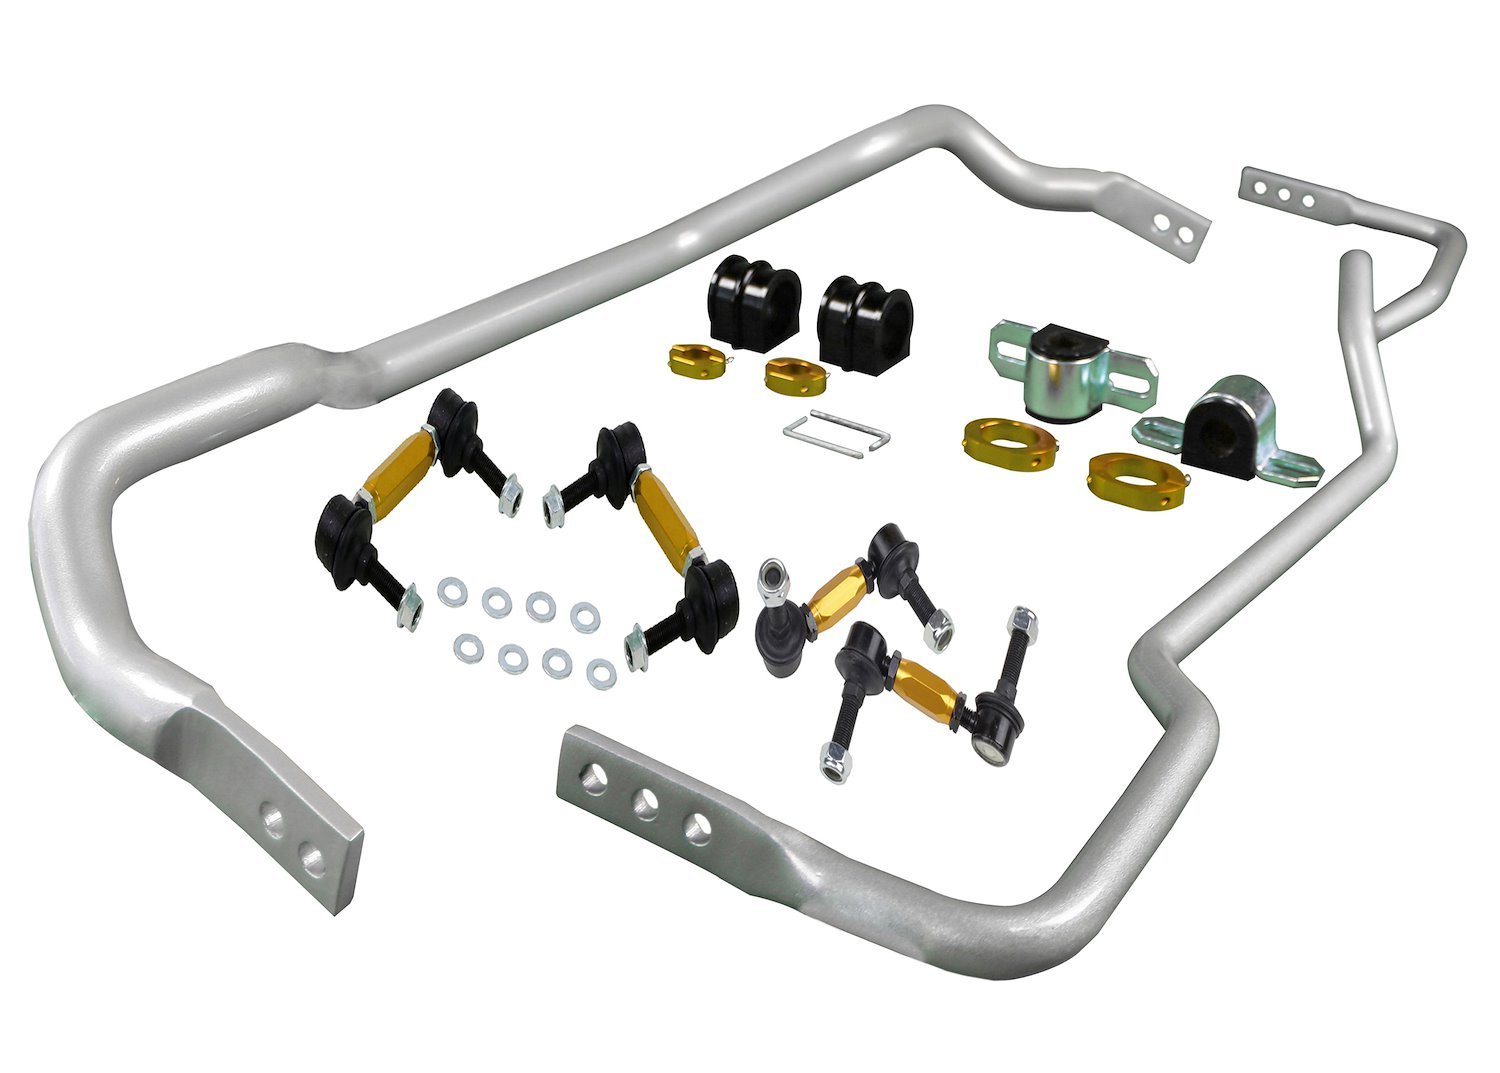 BNK006 Front and Rear Sway Bar Assembly Kit